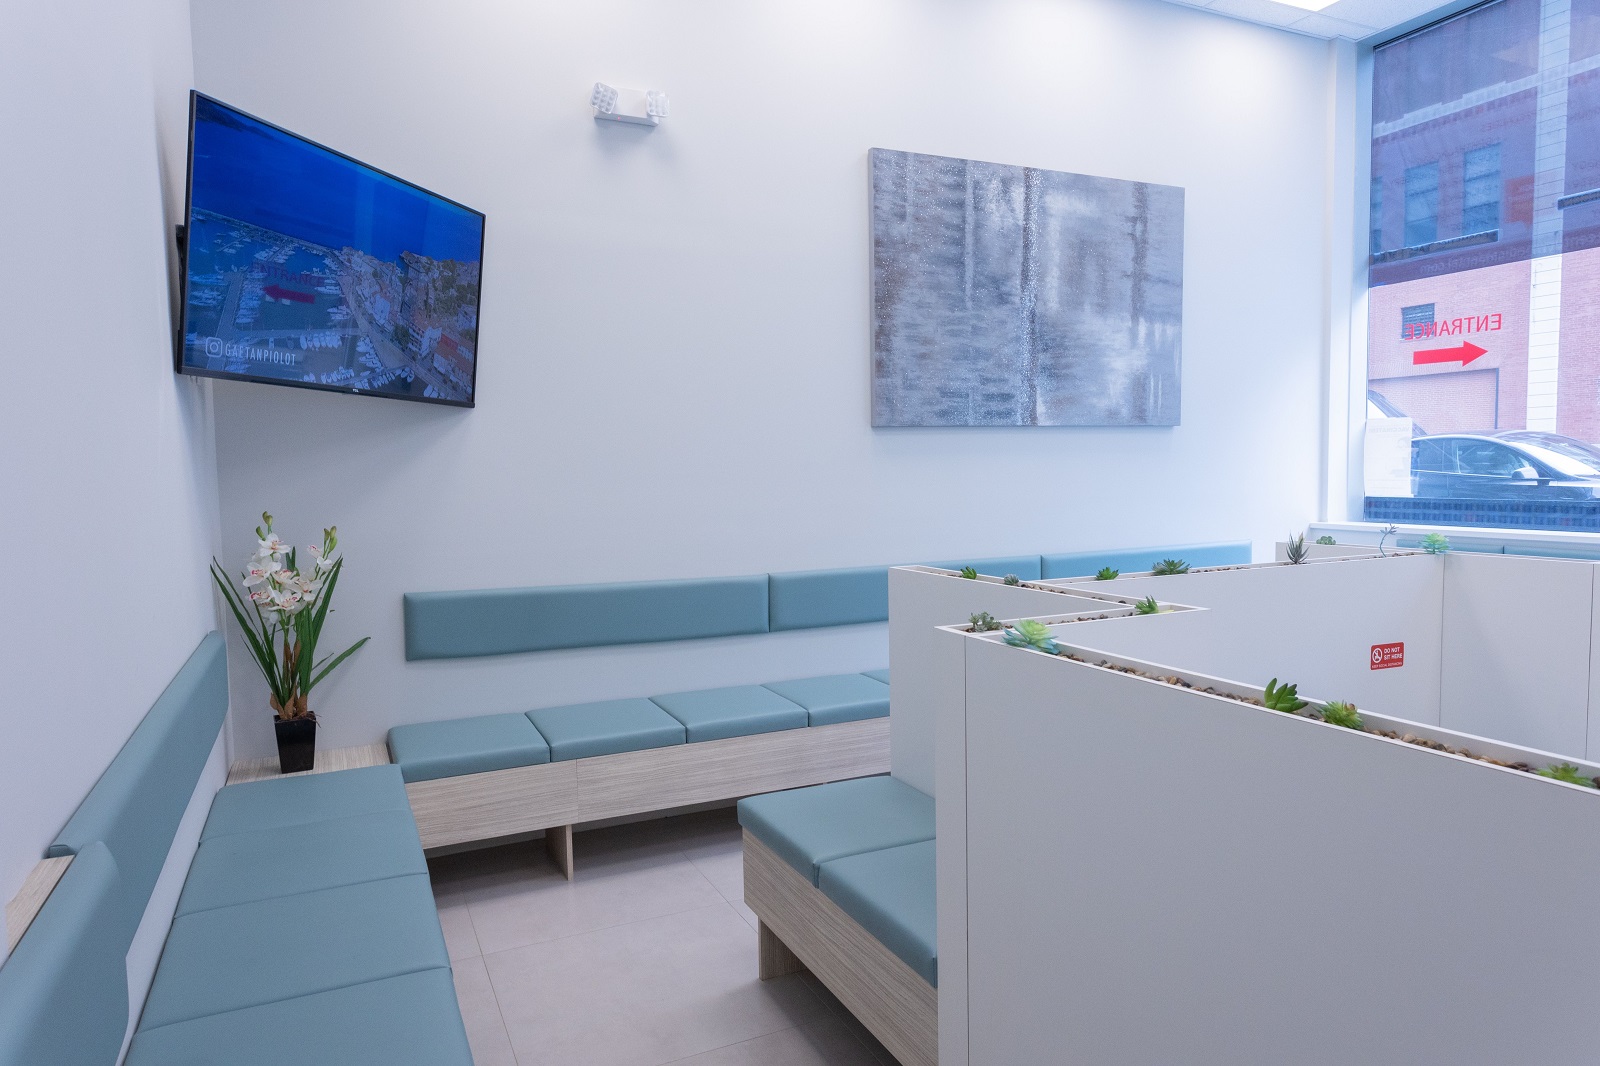 Photos of Our Business - Century Dentistry Center - Photo (165879)